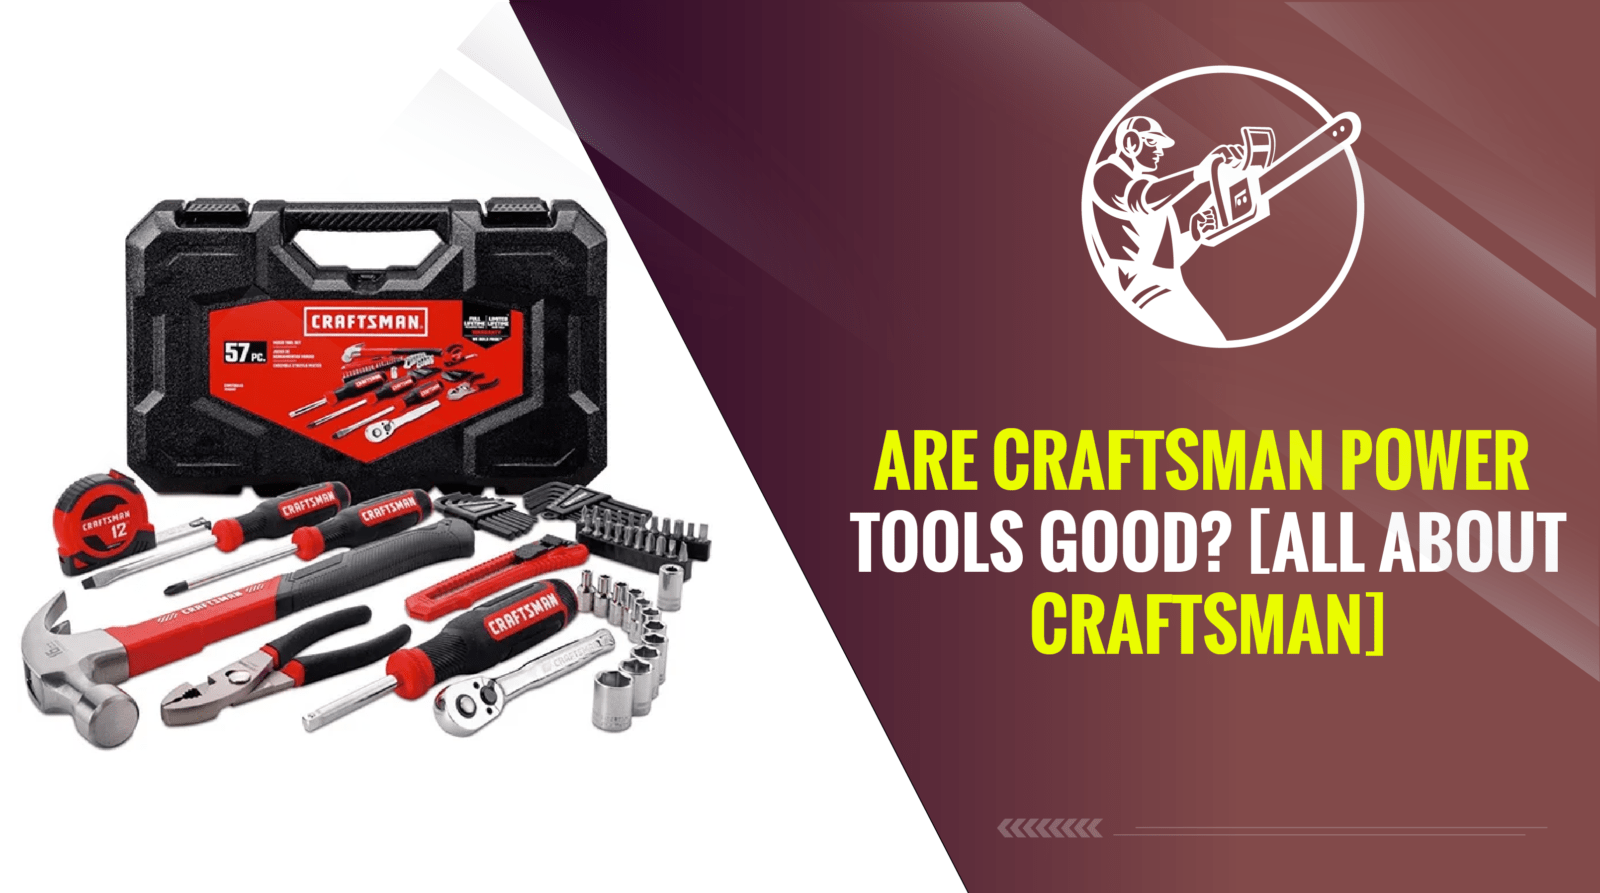 Are Craftsman Power Tools Good? [All About Craftsman]